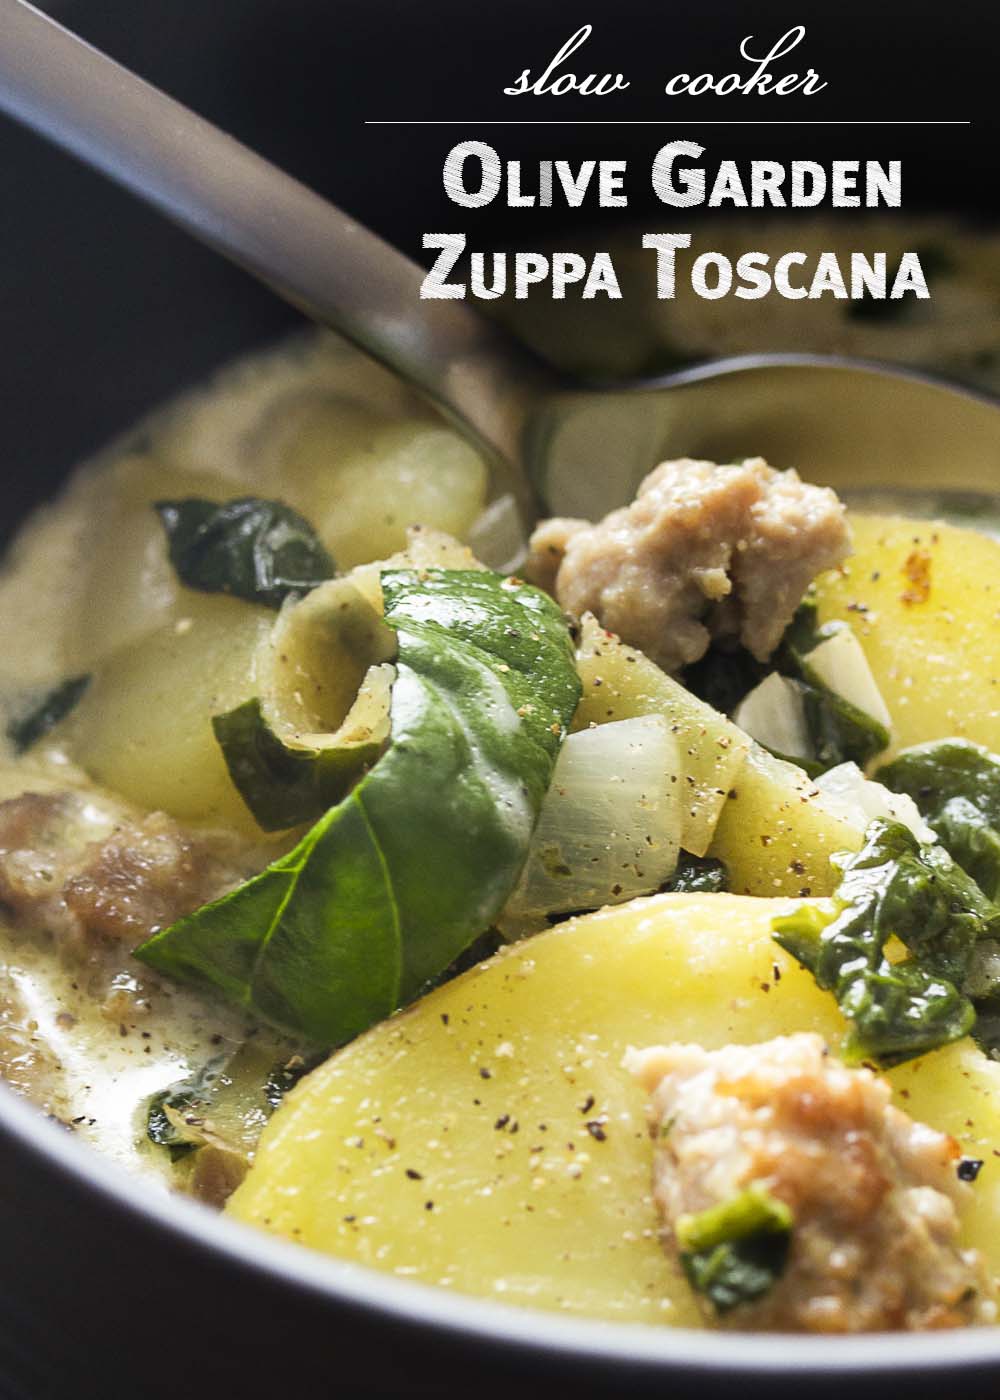 Love Olive Garden's zuppa toscana and want to make it at home? I've adapted the recipe to create a slow cooker zuppa toscana perfect to make on busy days! | justalittlebitofbacon.com